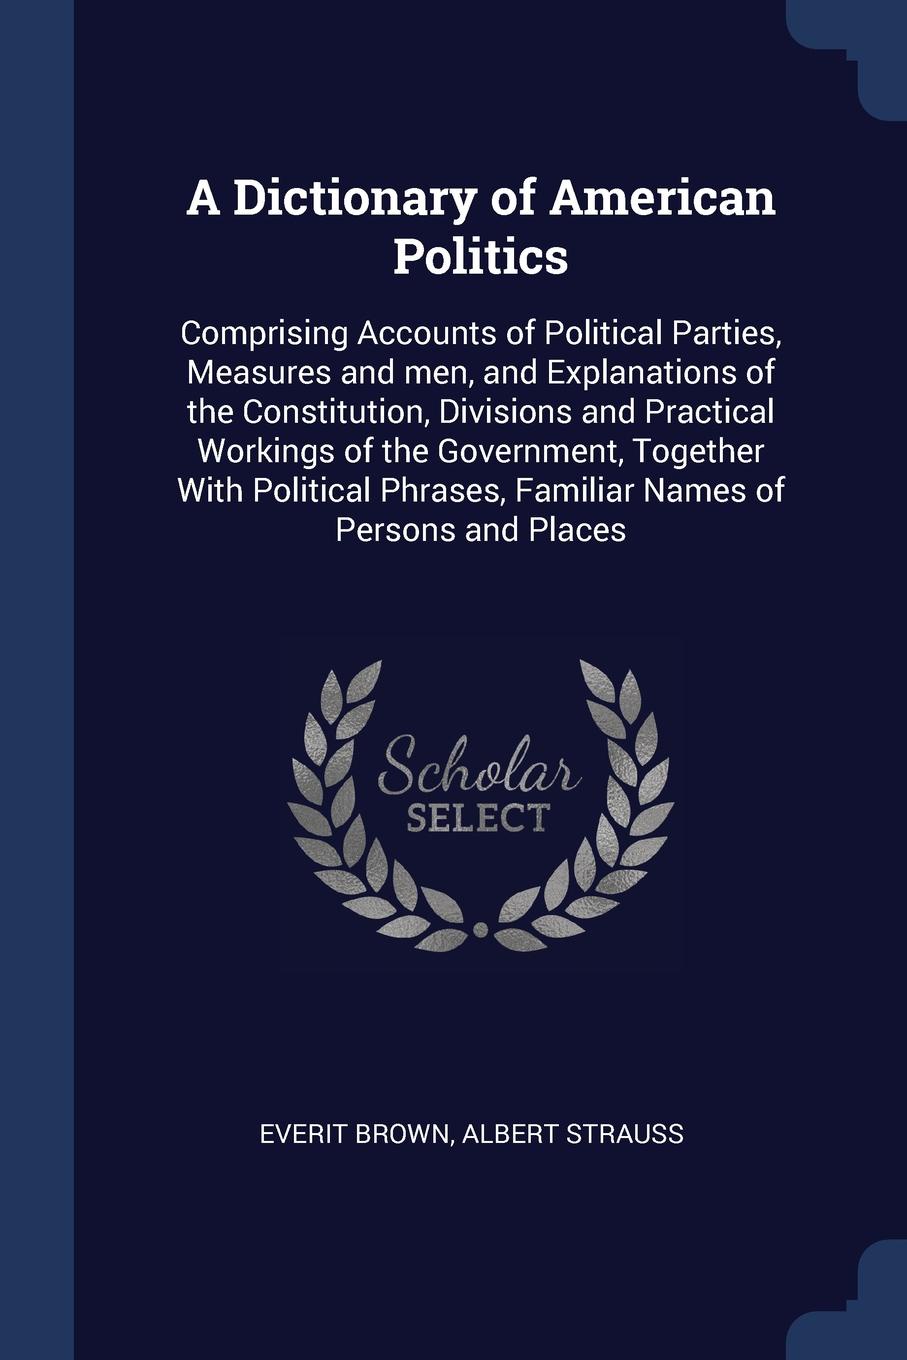 A Dictionary of American Politics. Comprising Accounts of Political Parties, Measures and men, and Explanations of the Constitution, Divisions and Practical Workings of the Government, Together With Political Phrases, Familiar Names of Persons and...